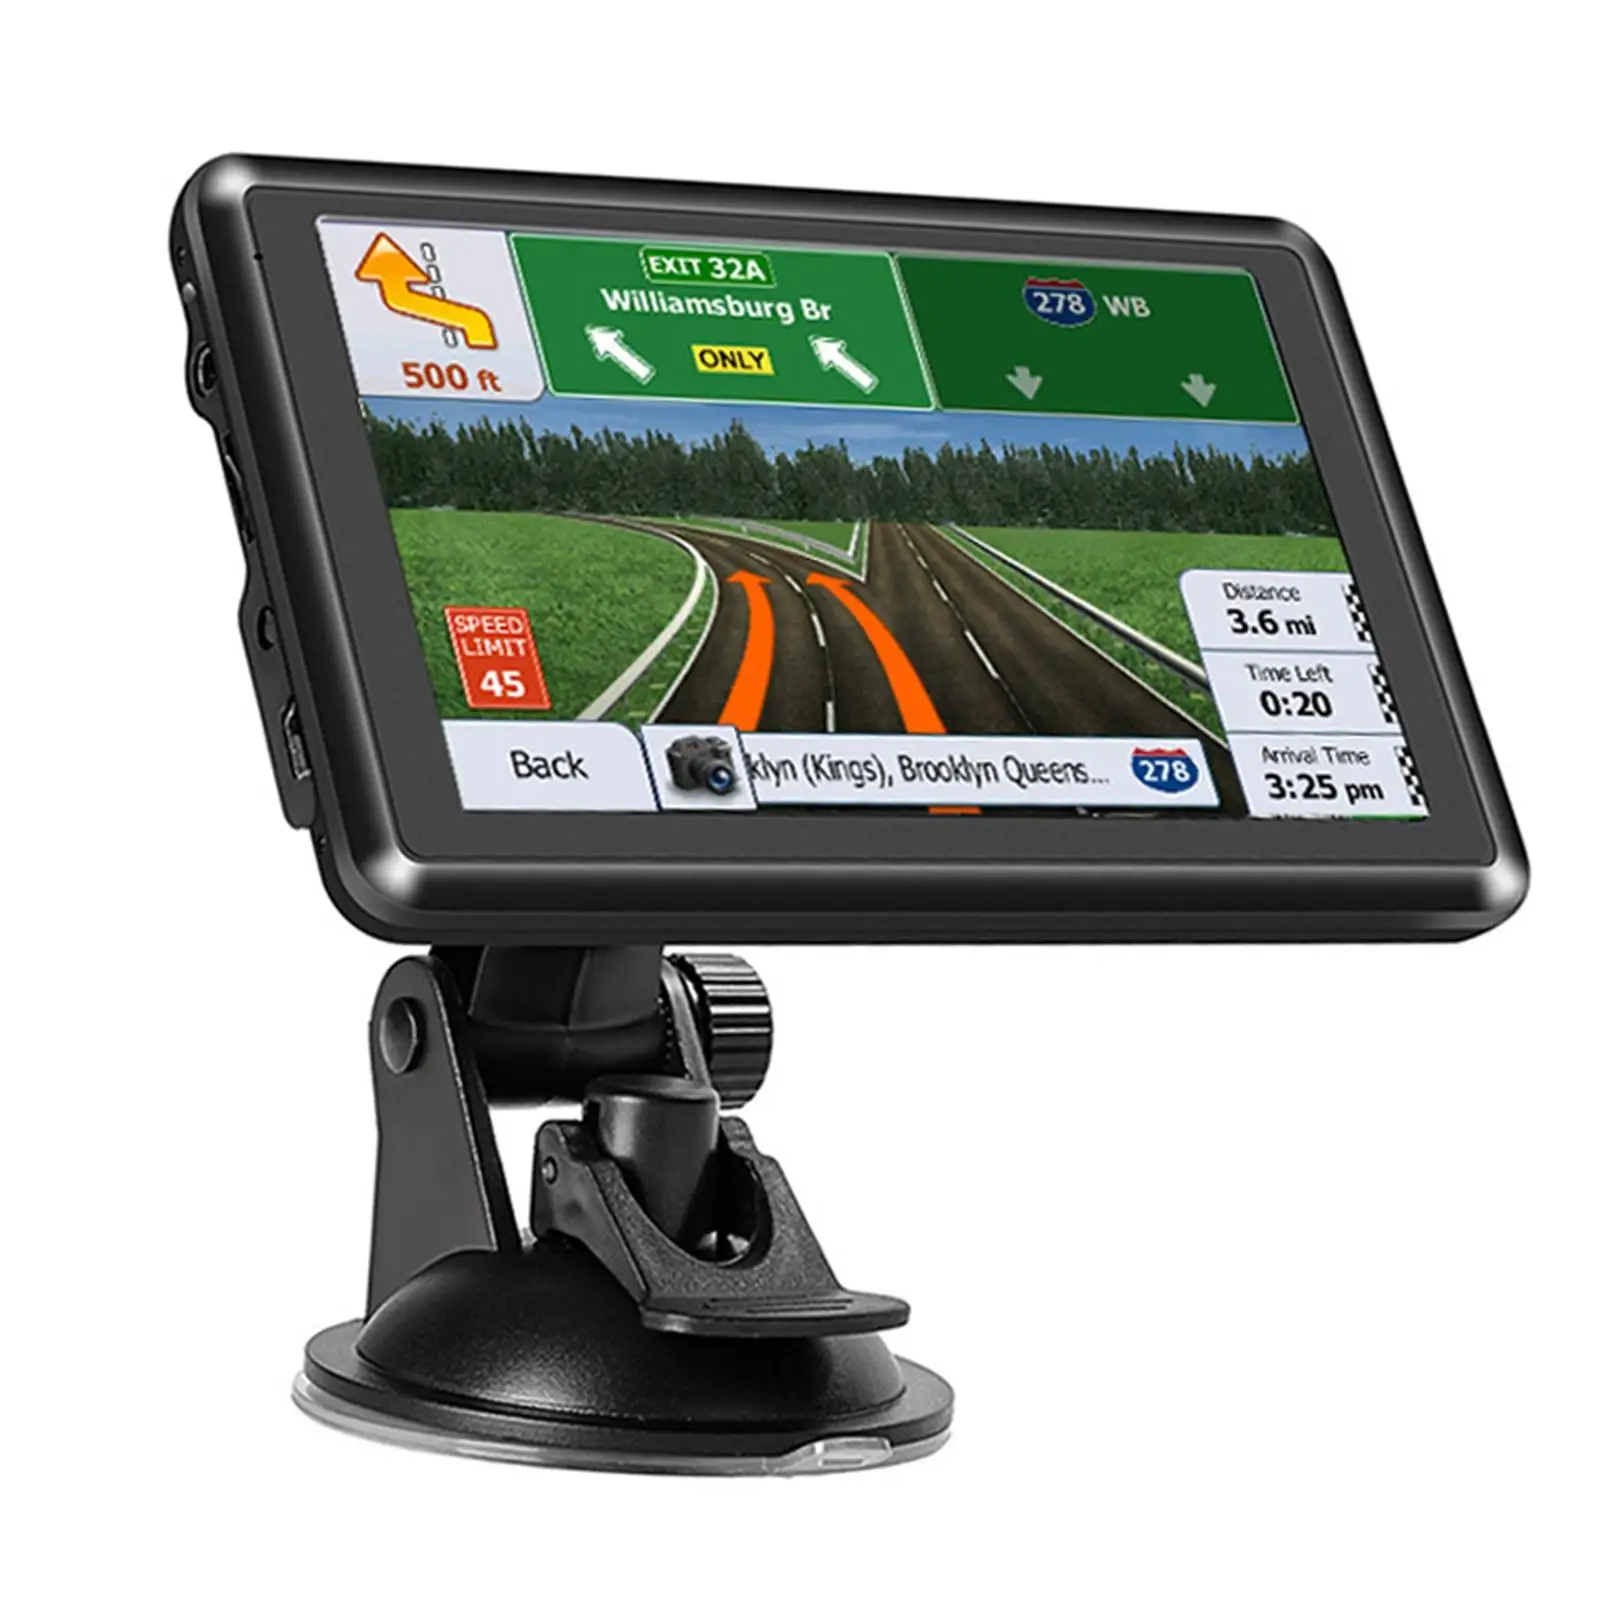 5 inch Touch Screen Car Truck GPS Navigation System GPS Satellite Navigator, Vehicle 8G &128 MB High Resolution Maps